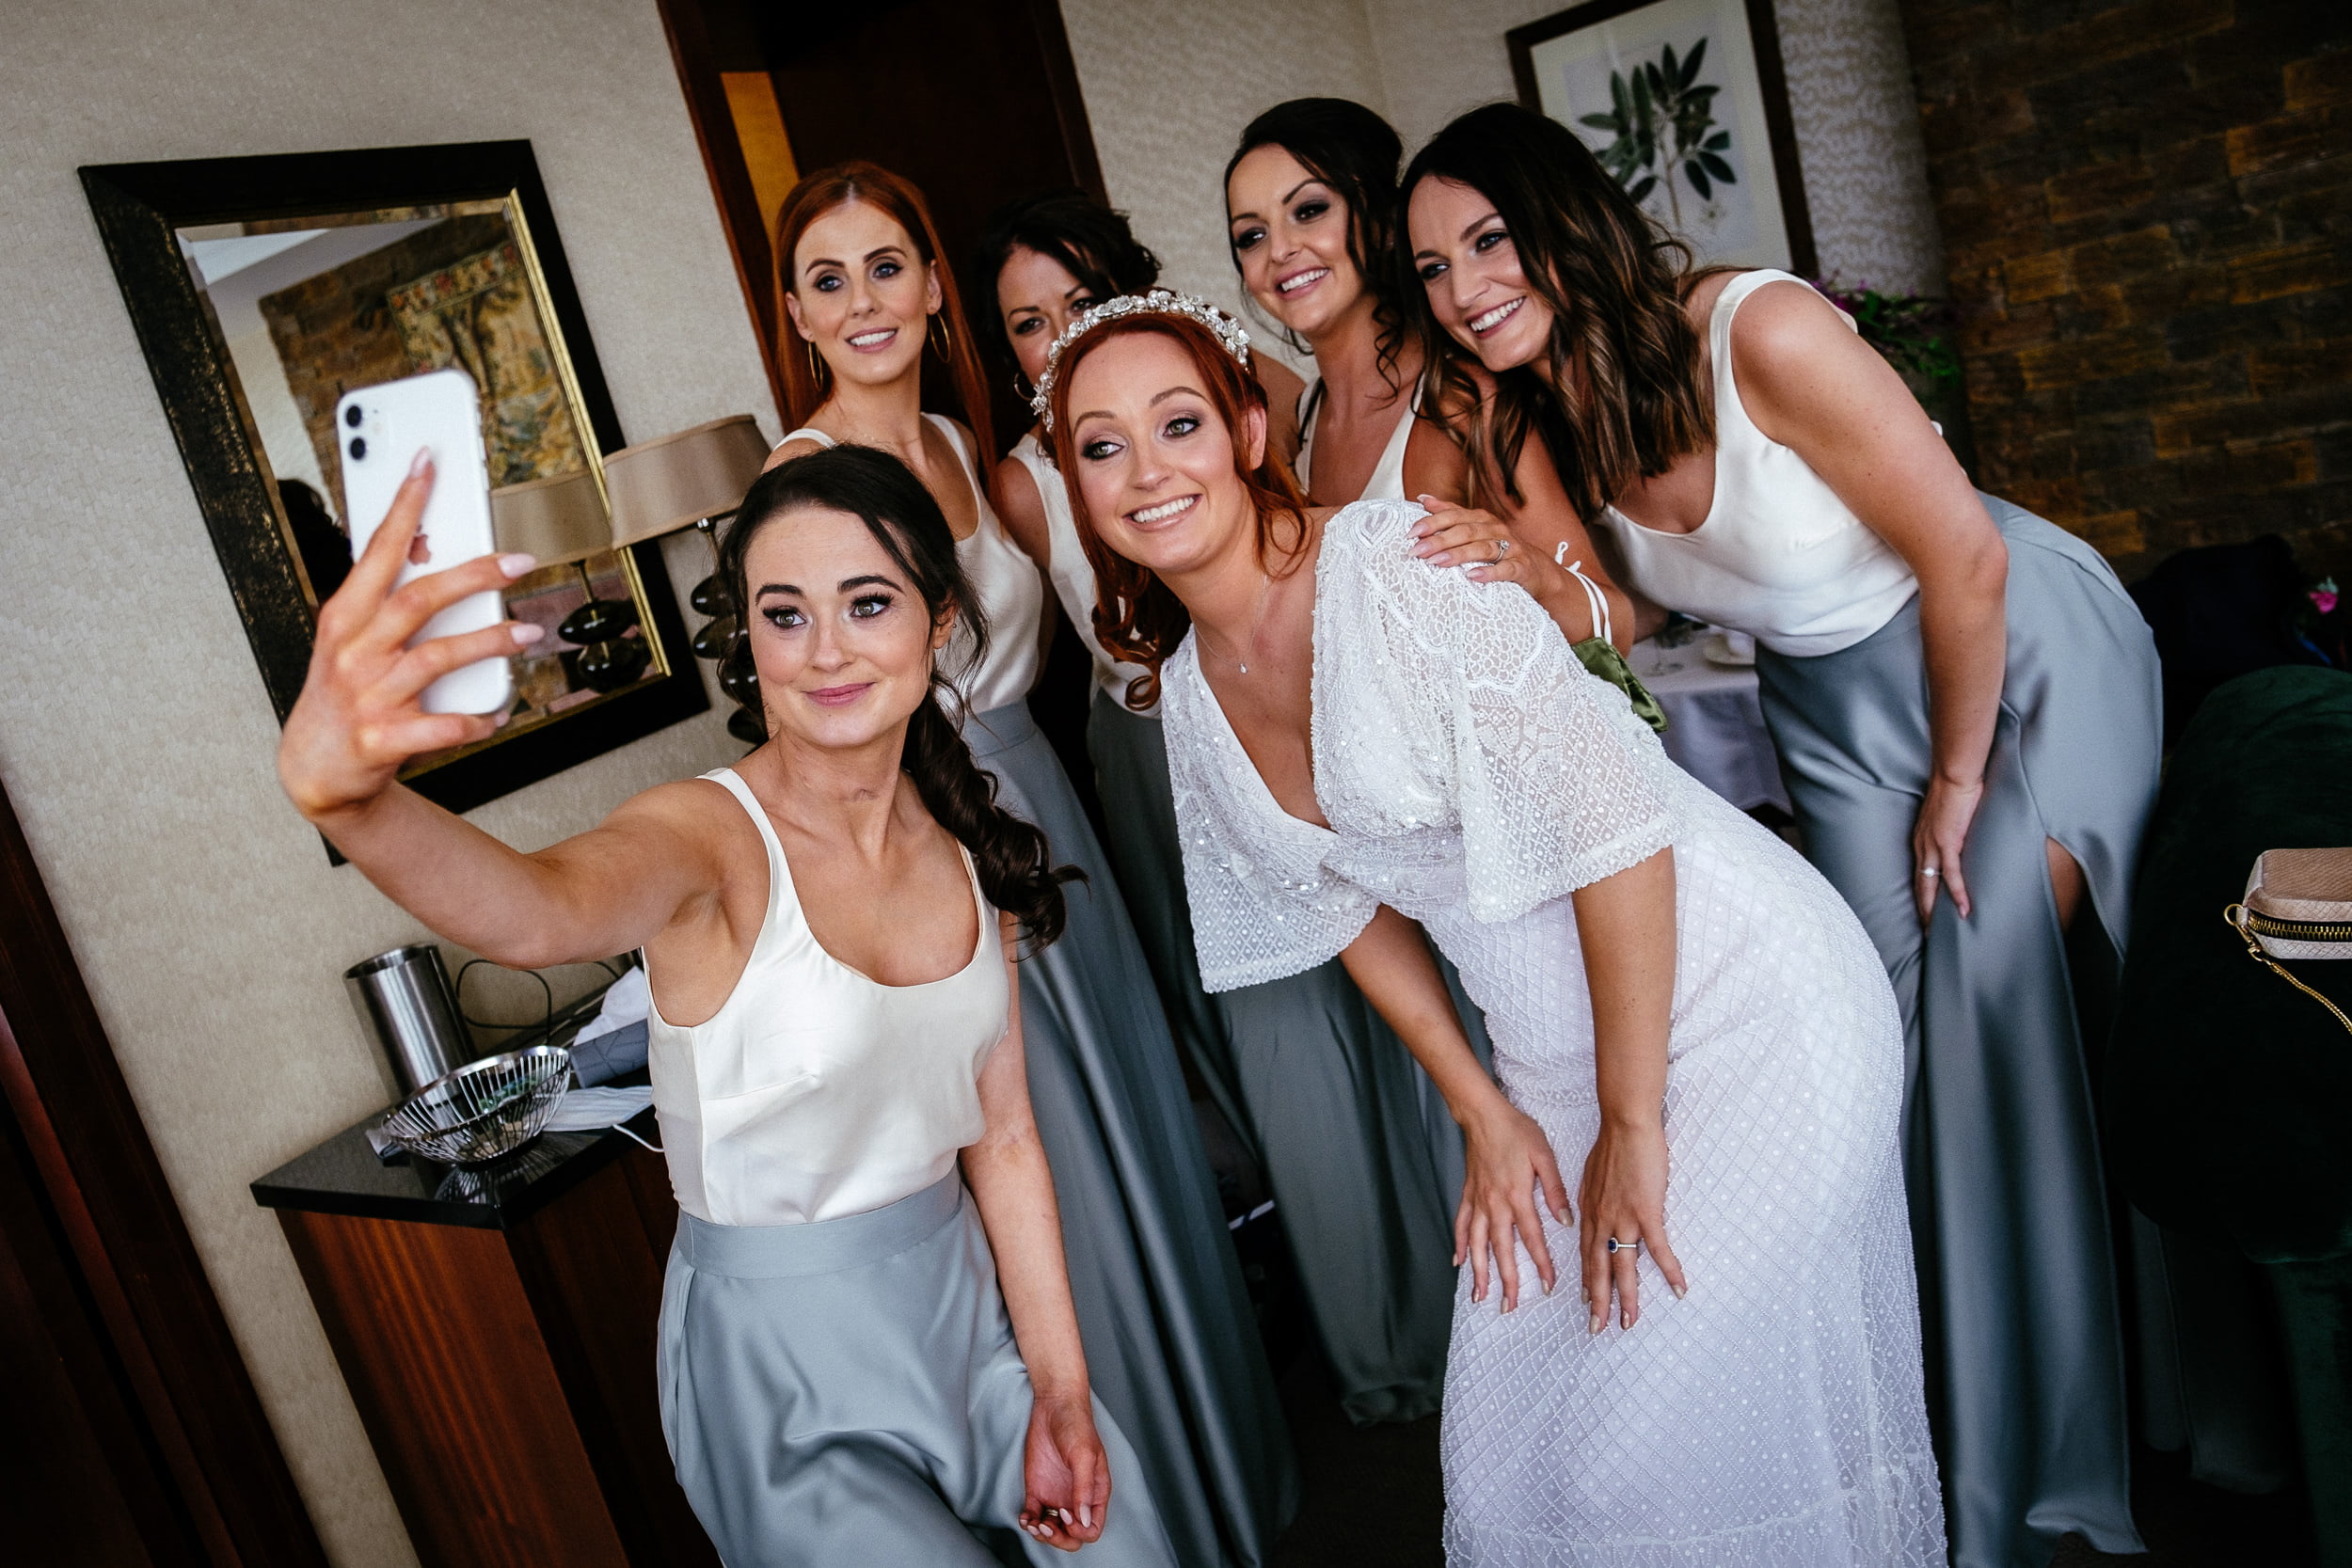 group selfie photo of bride and bridesmaids before their wedding at the Fota Island Resort Cork